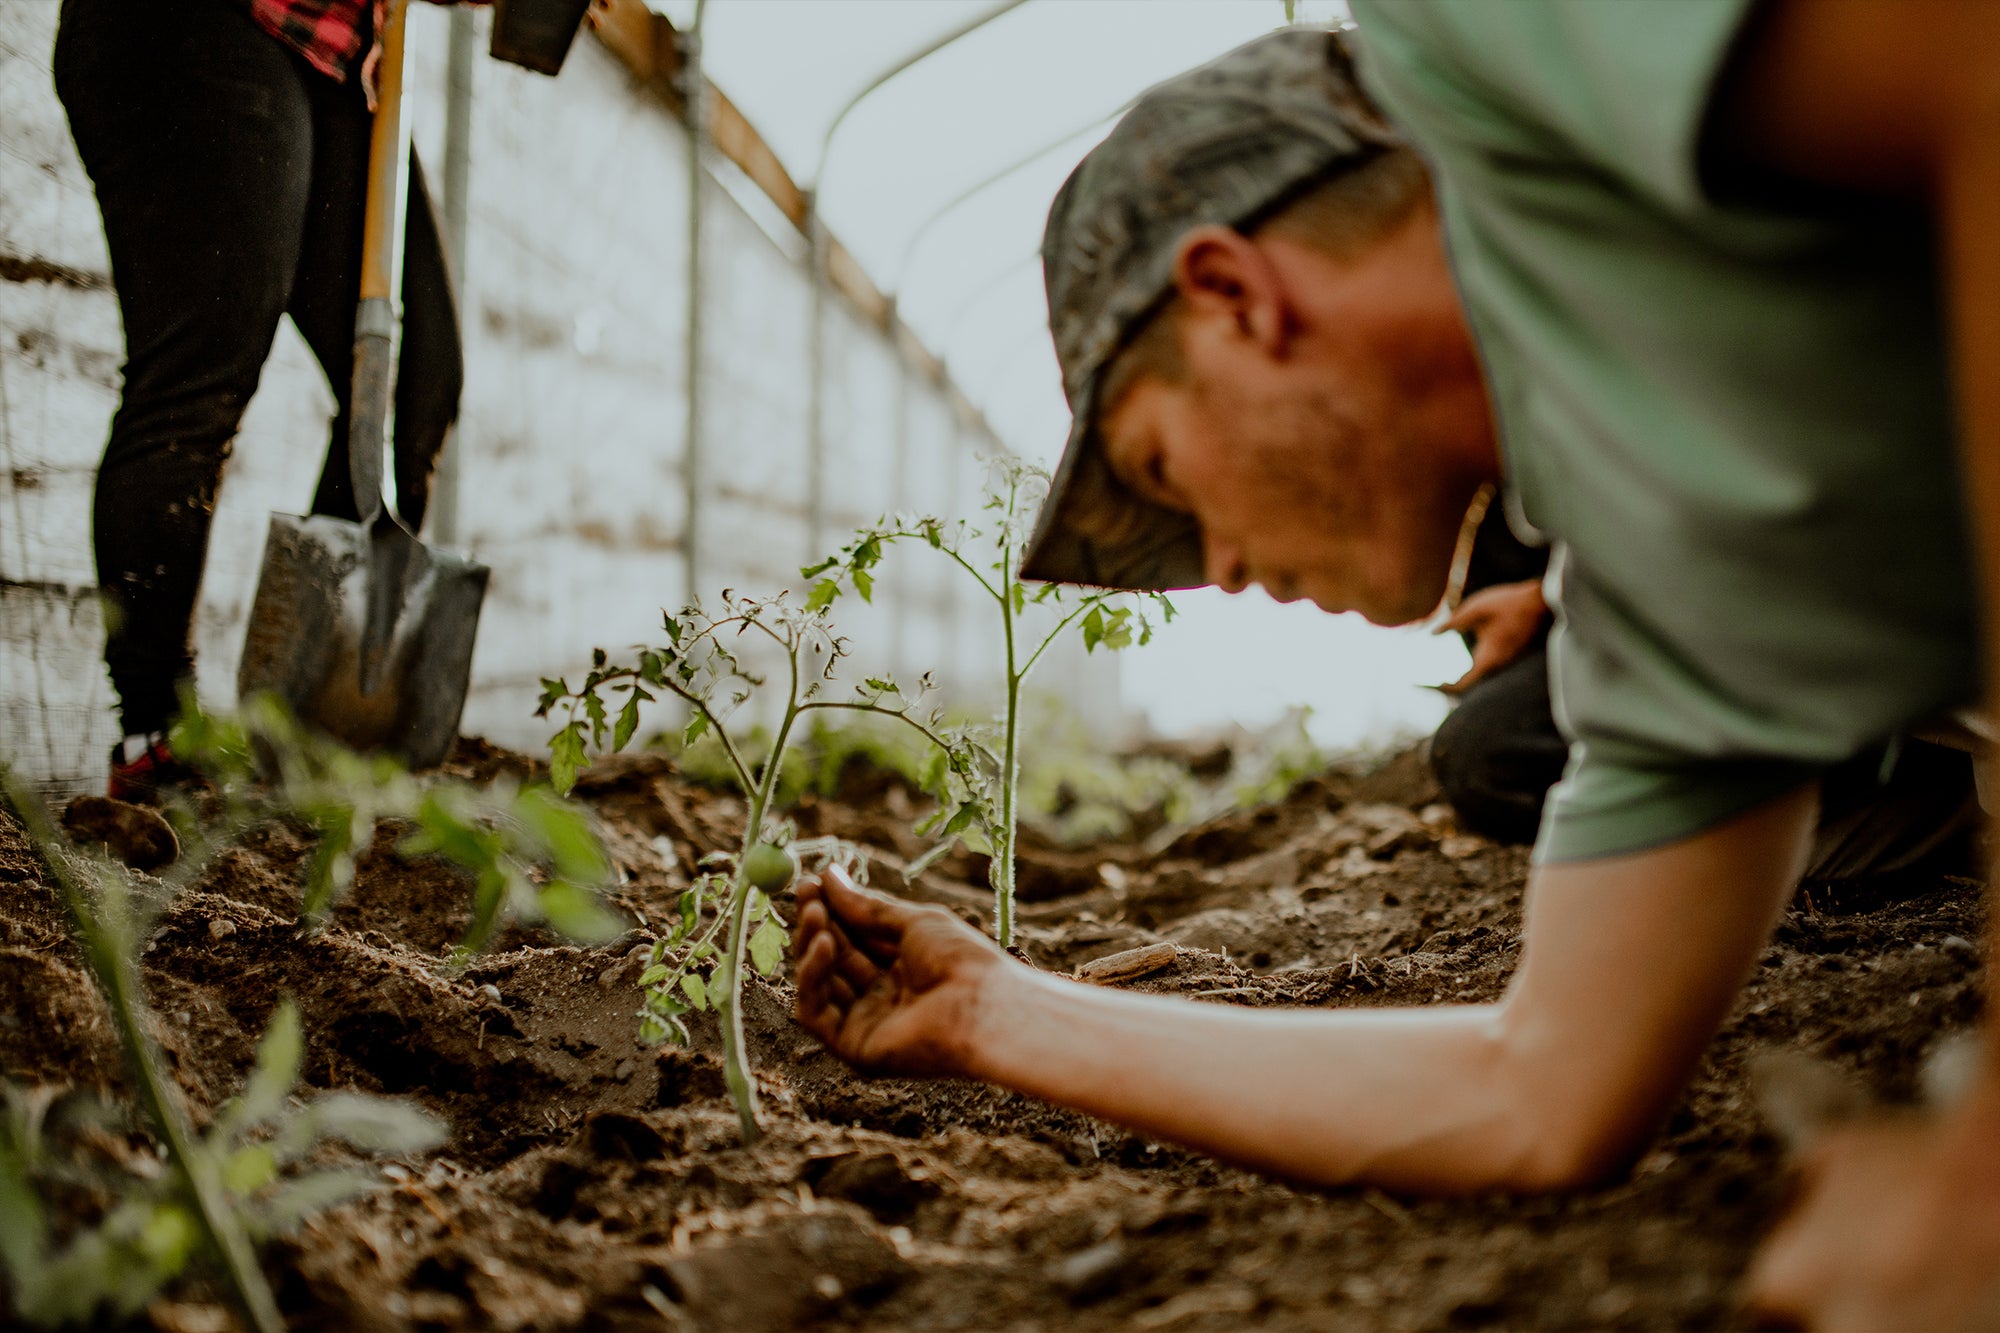 Farming with Purpose: Meet Mountain Roots